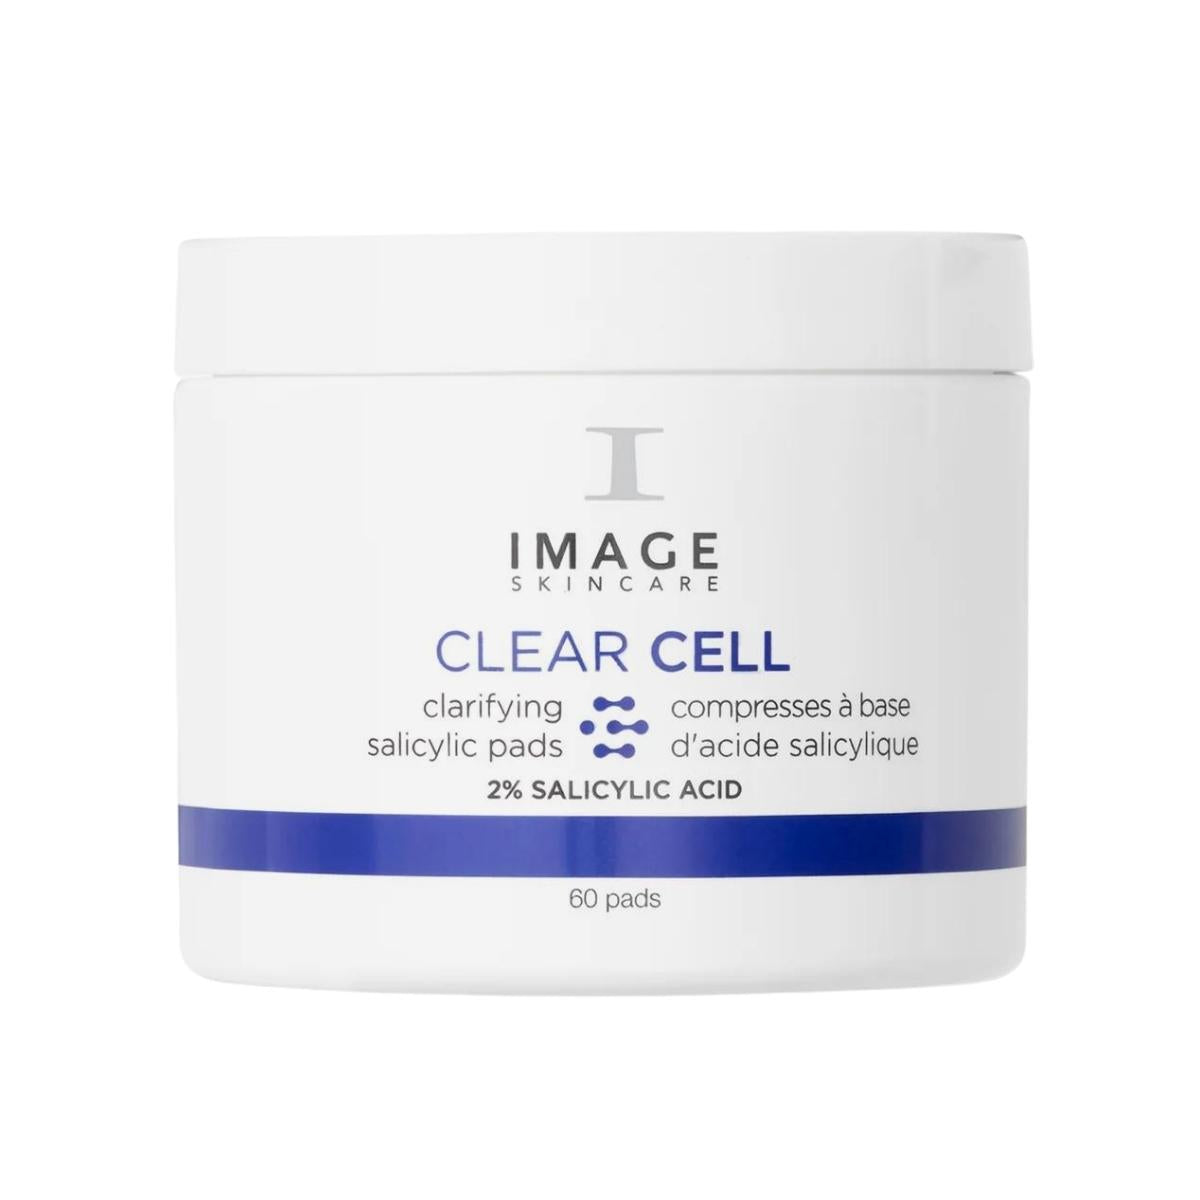 IMAGE Skincare Clear Cell Clarifying Pads 